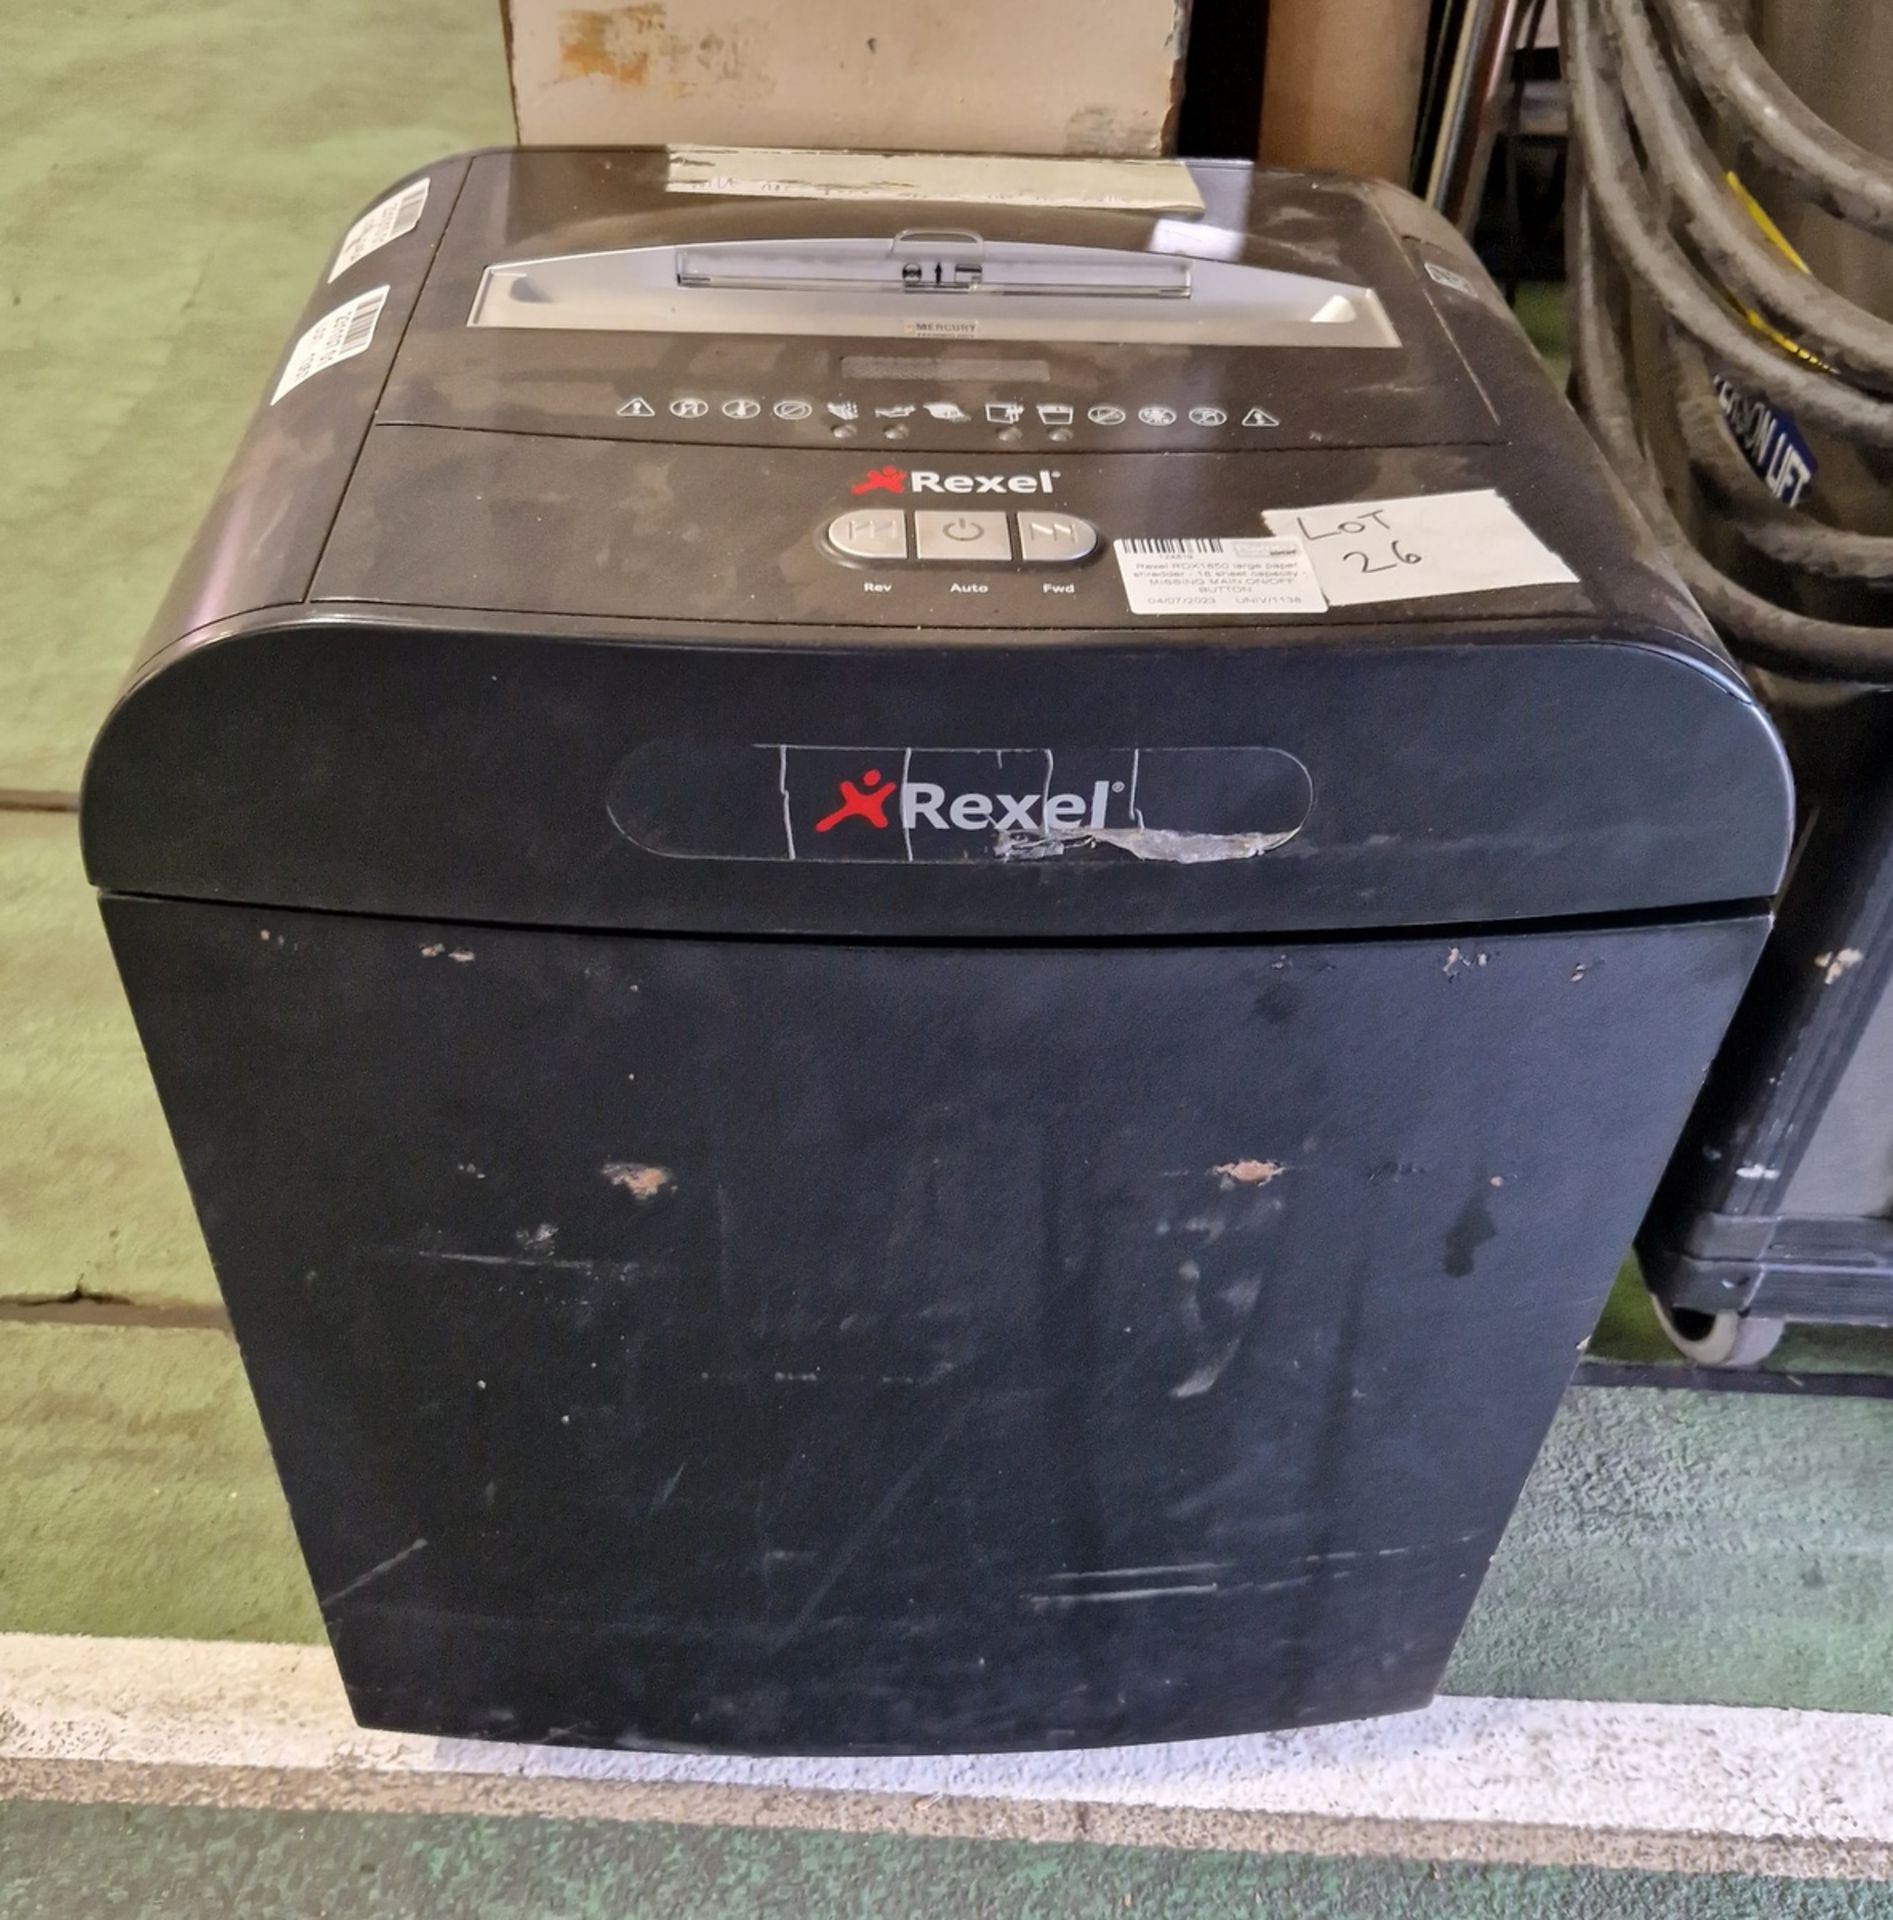 Rexel RDX1850 large paper shredder - 18 sheet capacity - MISSING MAIN ON/OFF BUTTON - Image 2 of 4